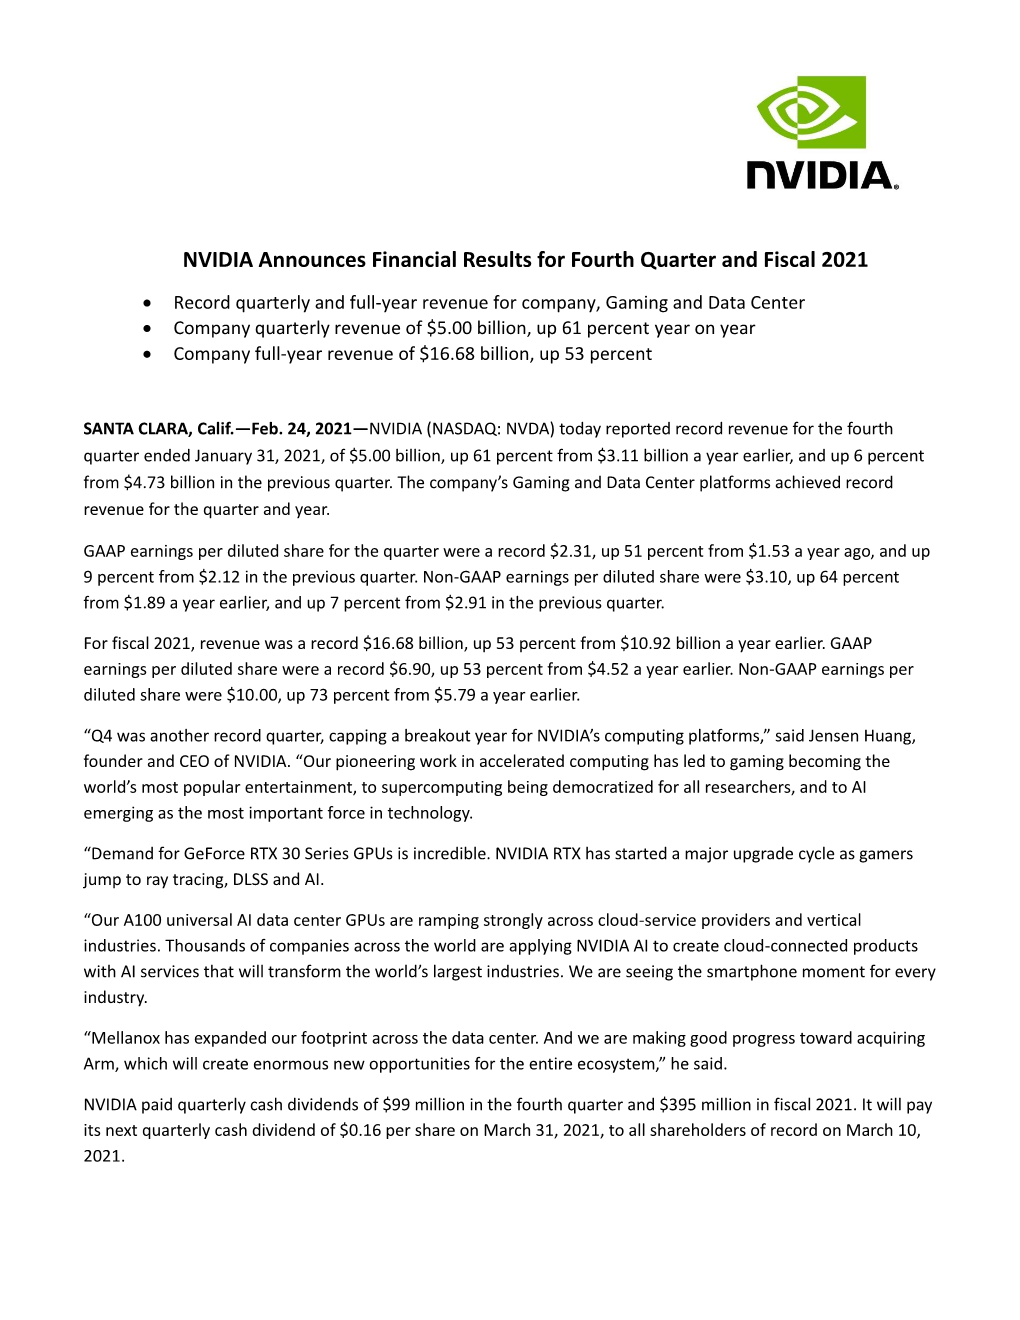 NVIDIA Announces Financial Results for Fourth Quarter and Fiscal 2021